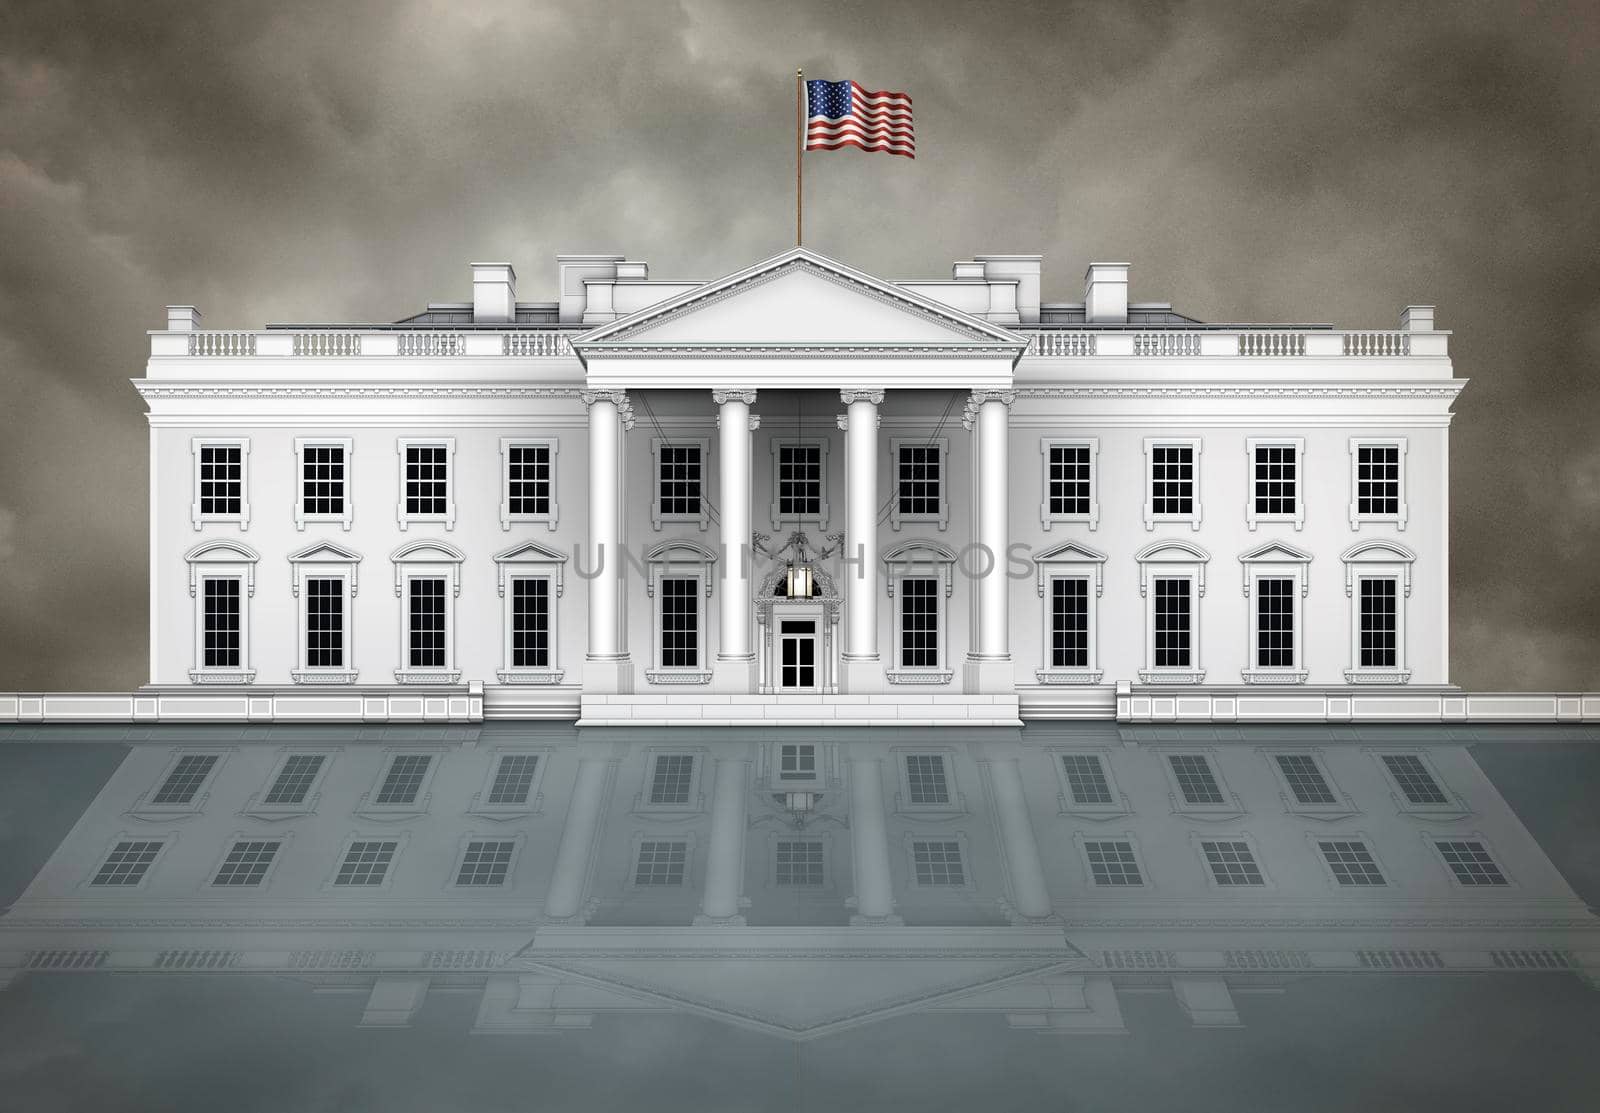 North view of the White House, with waving flag and cloudy sky, on a reflective surface that could be glass or water.  3D Illustration